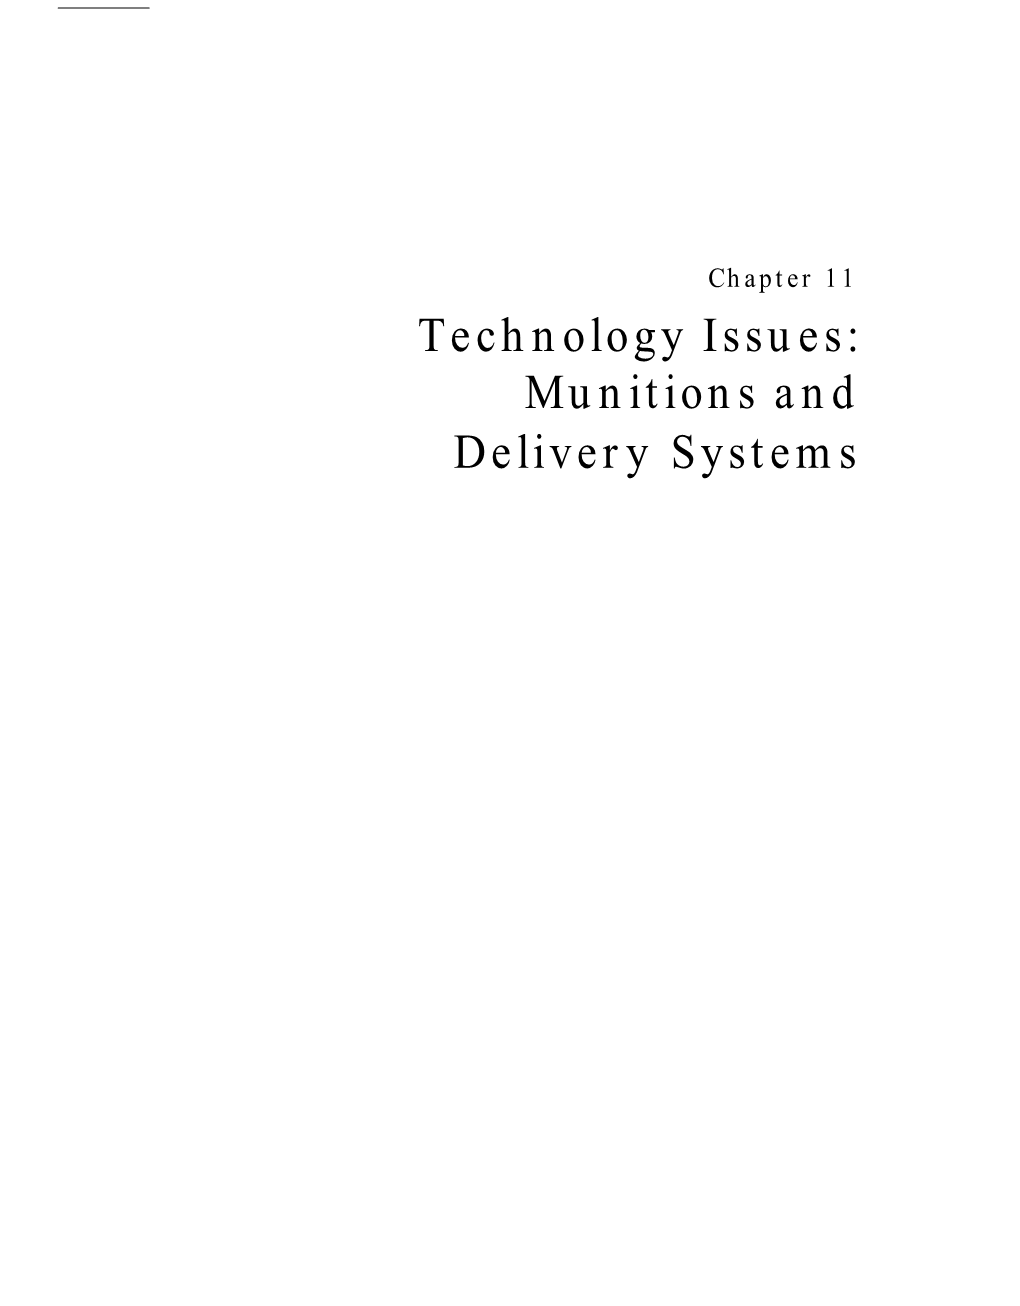 11: Technology Issues: Munitions and Delivery Systems